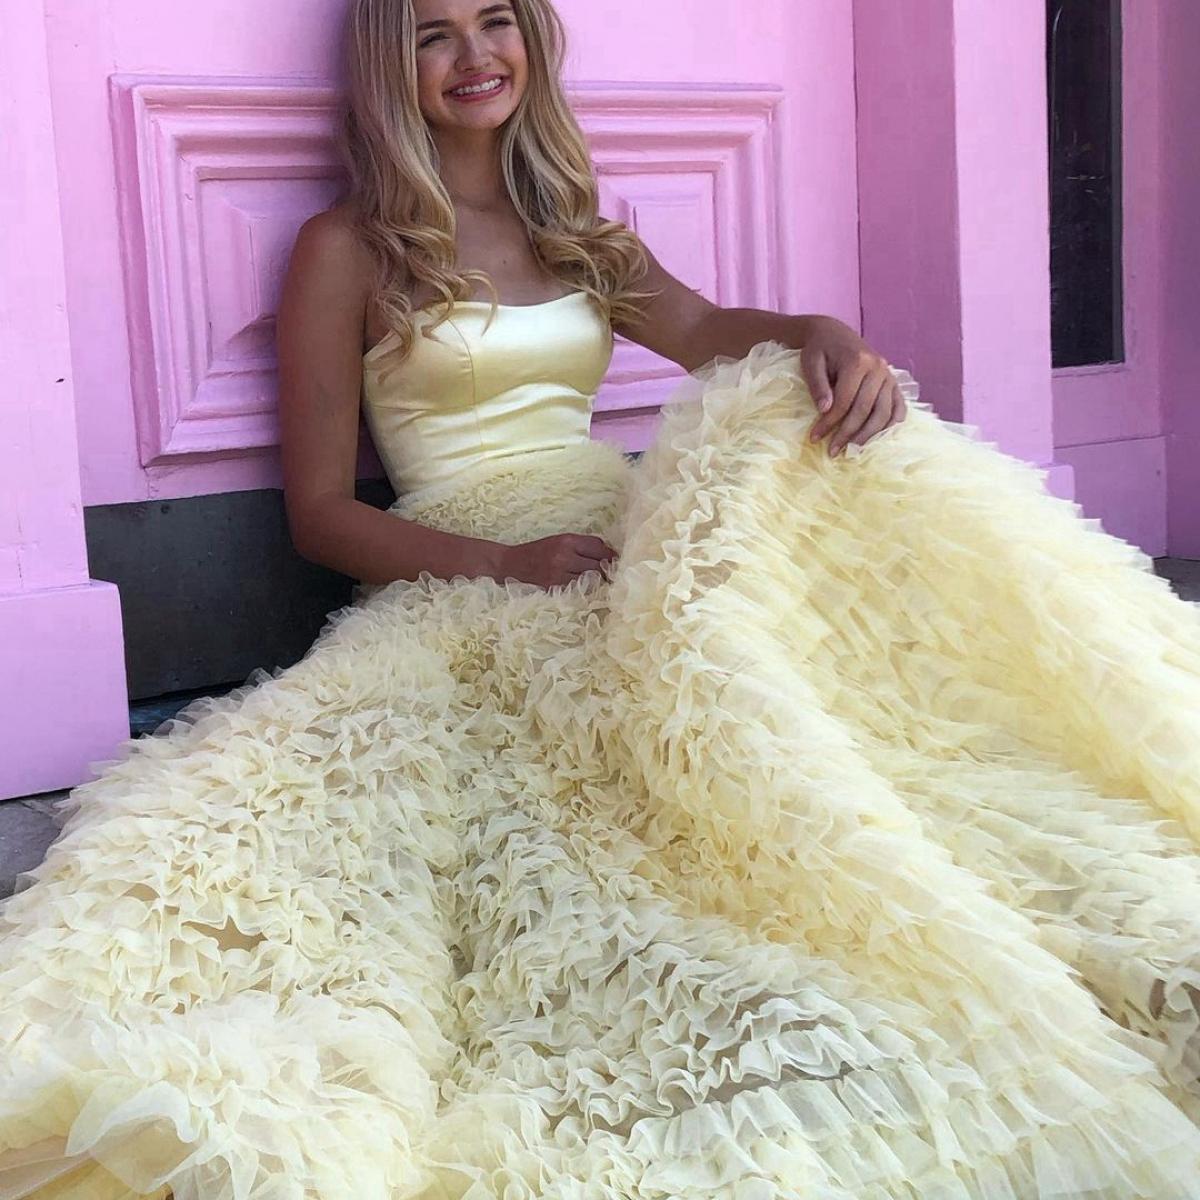 High Quality Bright Yellow Party Gown Strapless Sleeveless High Waist Floor Length Layered Puffy Tulle Formal Evening Dr